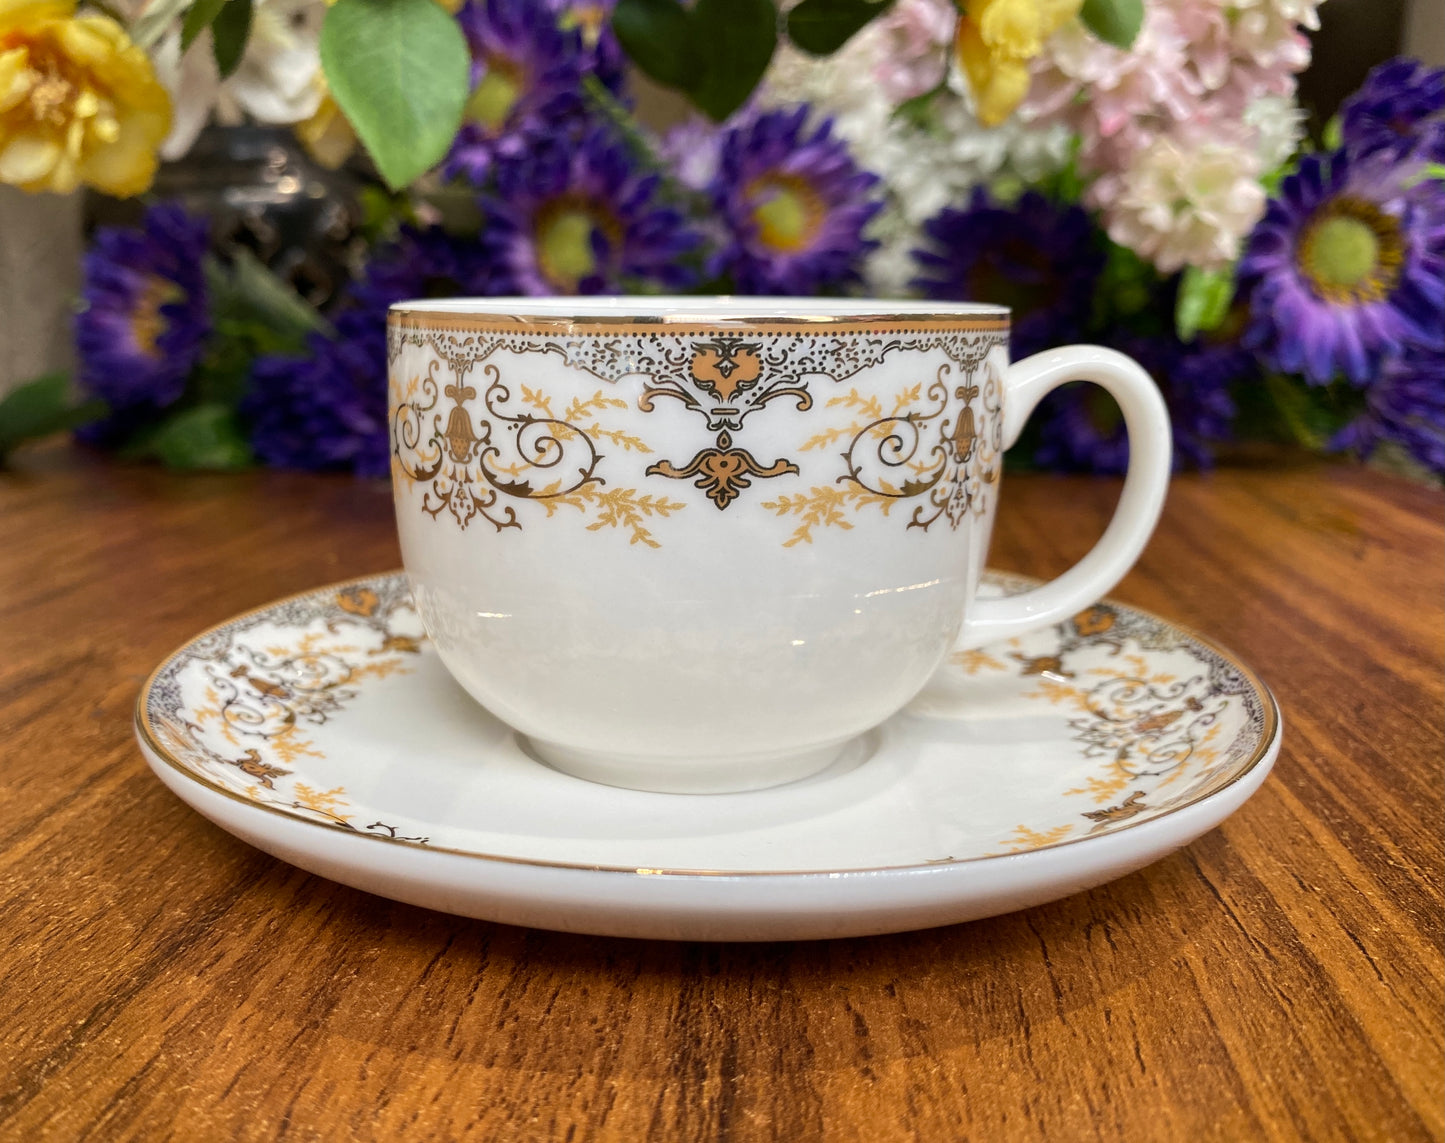 Mughal Pattern Cup and Saucer Set (6 Cups and 6 Saucers) - Vigneto